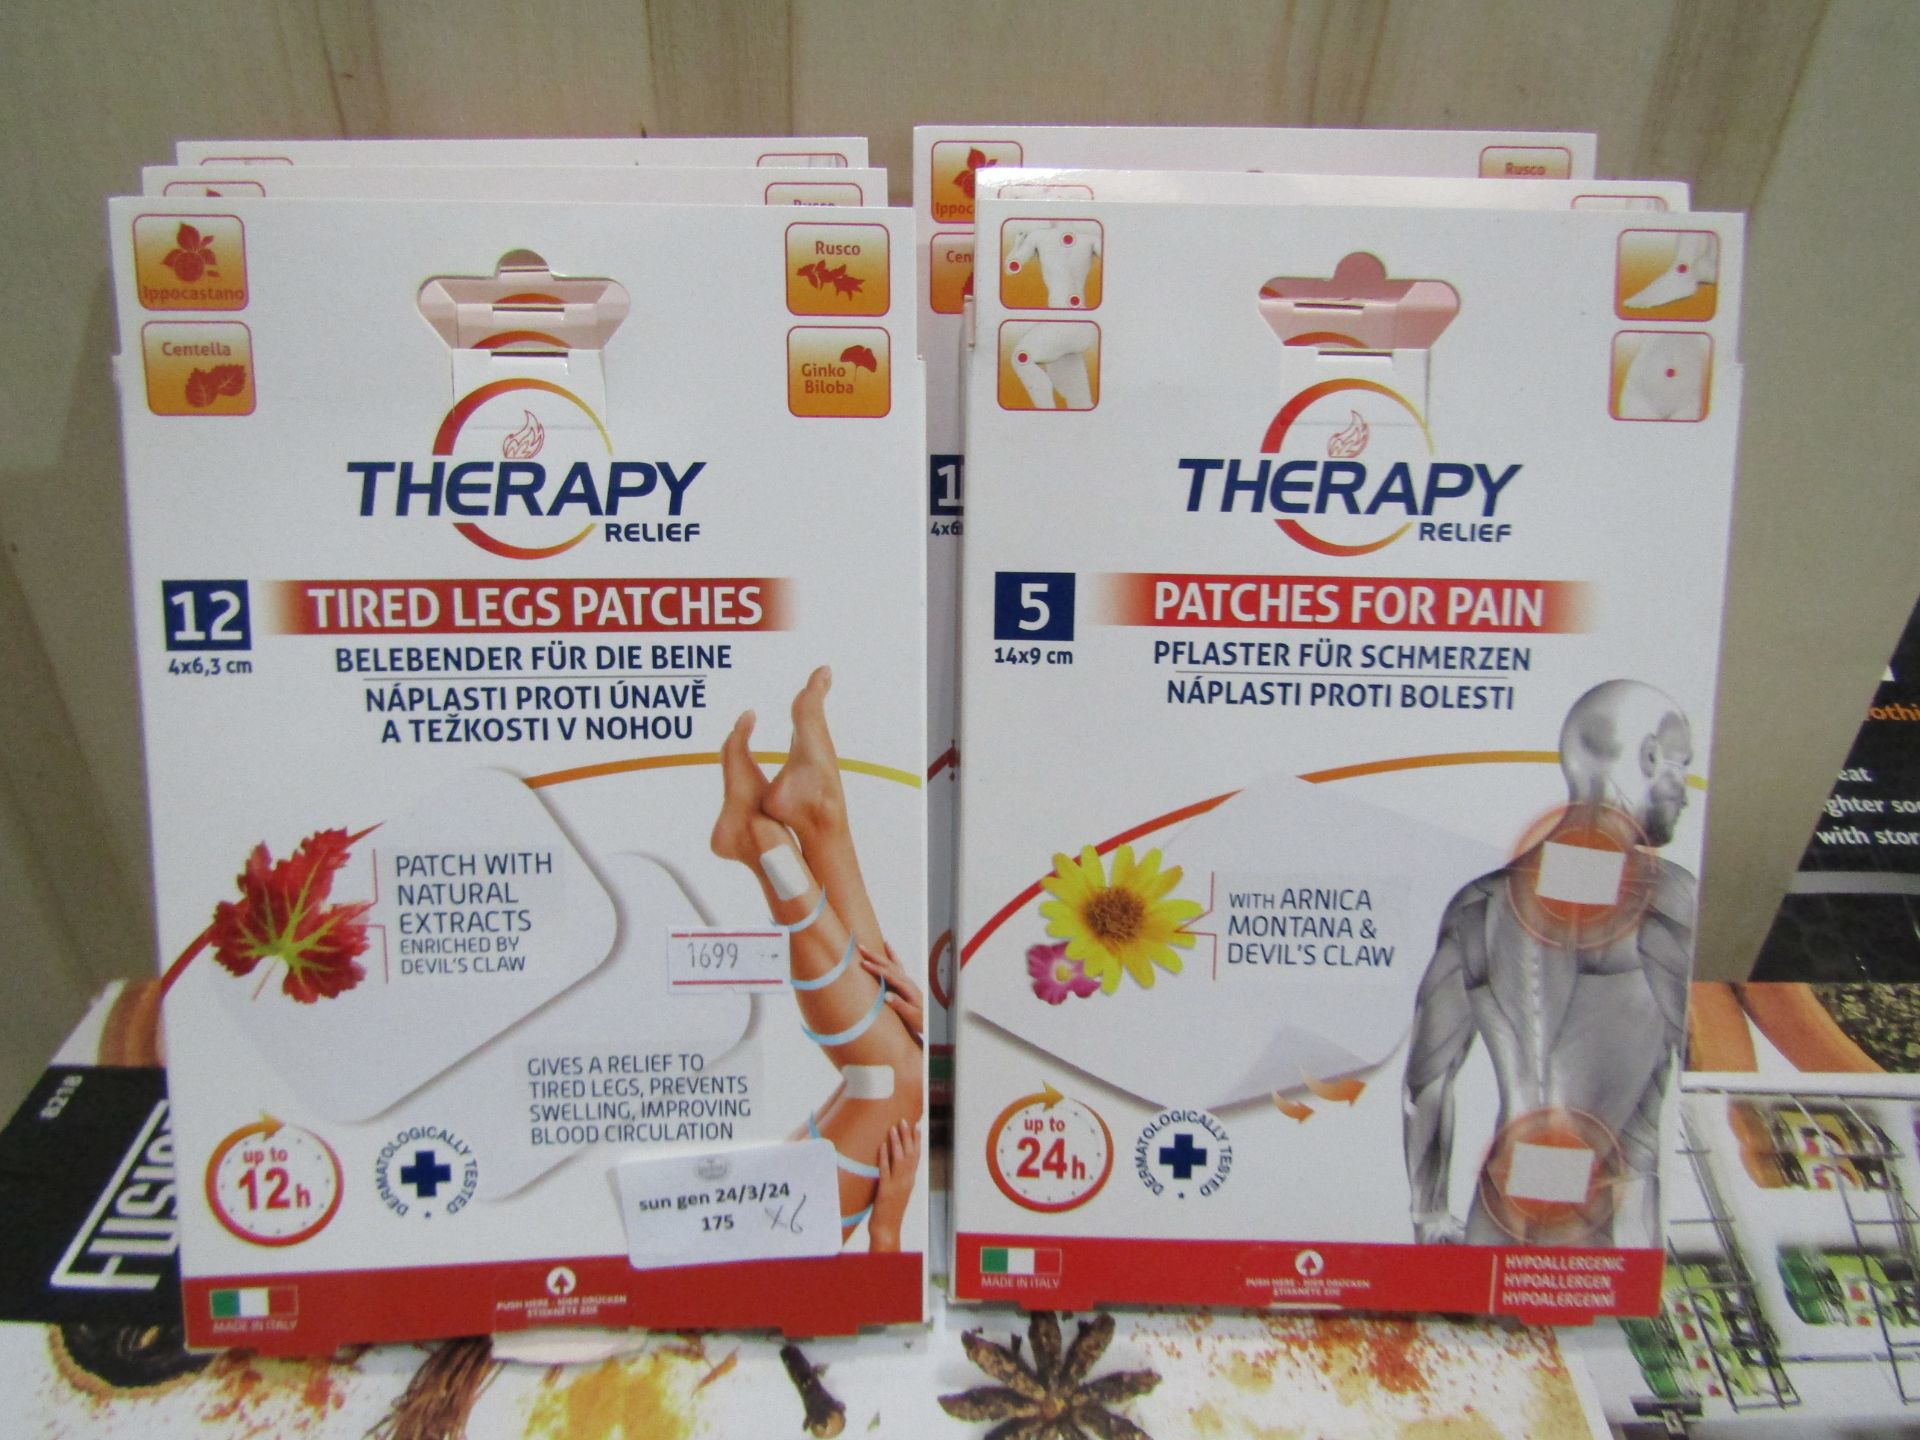 6x Packs Of 12 Therapy Relief Tired Legs Paches - Unchecked & Boxed.